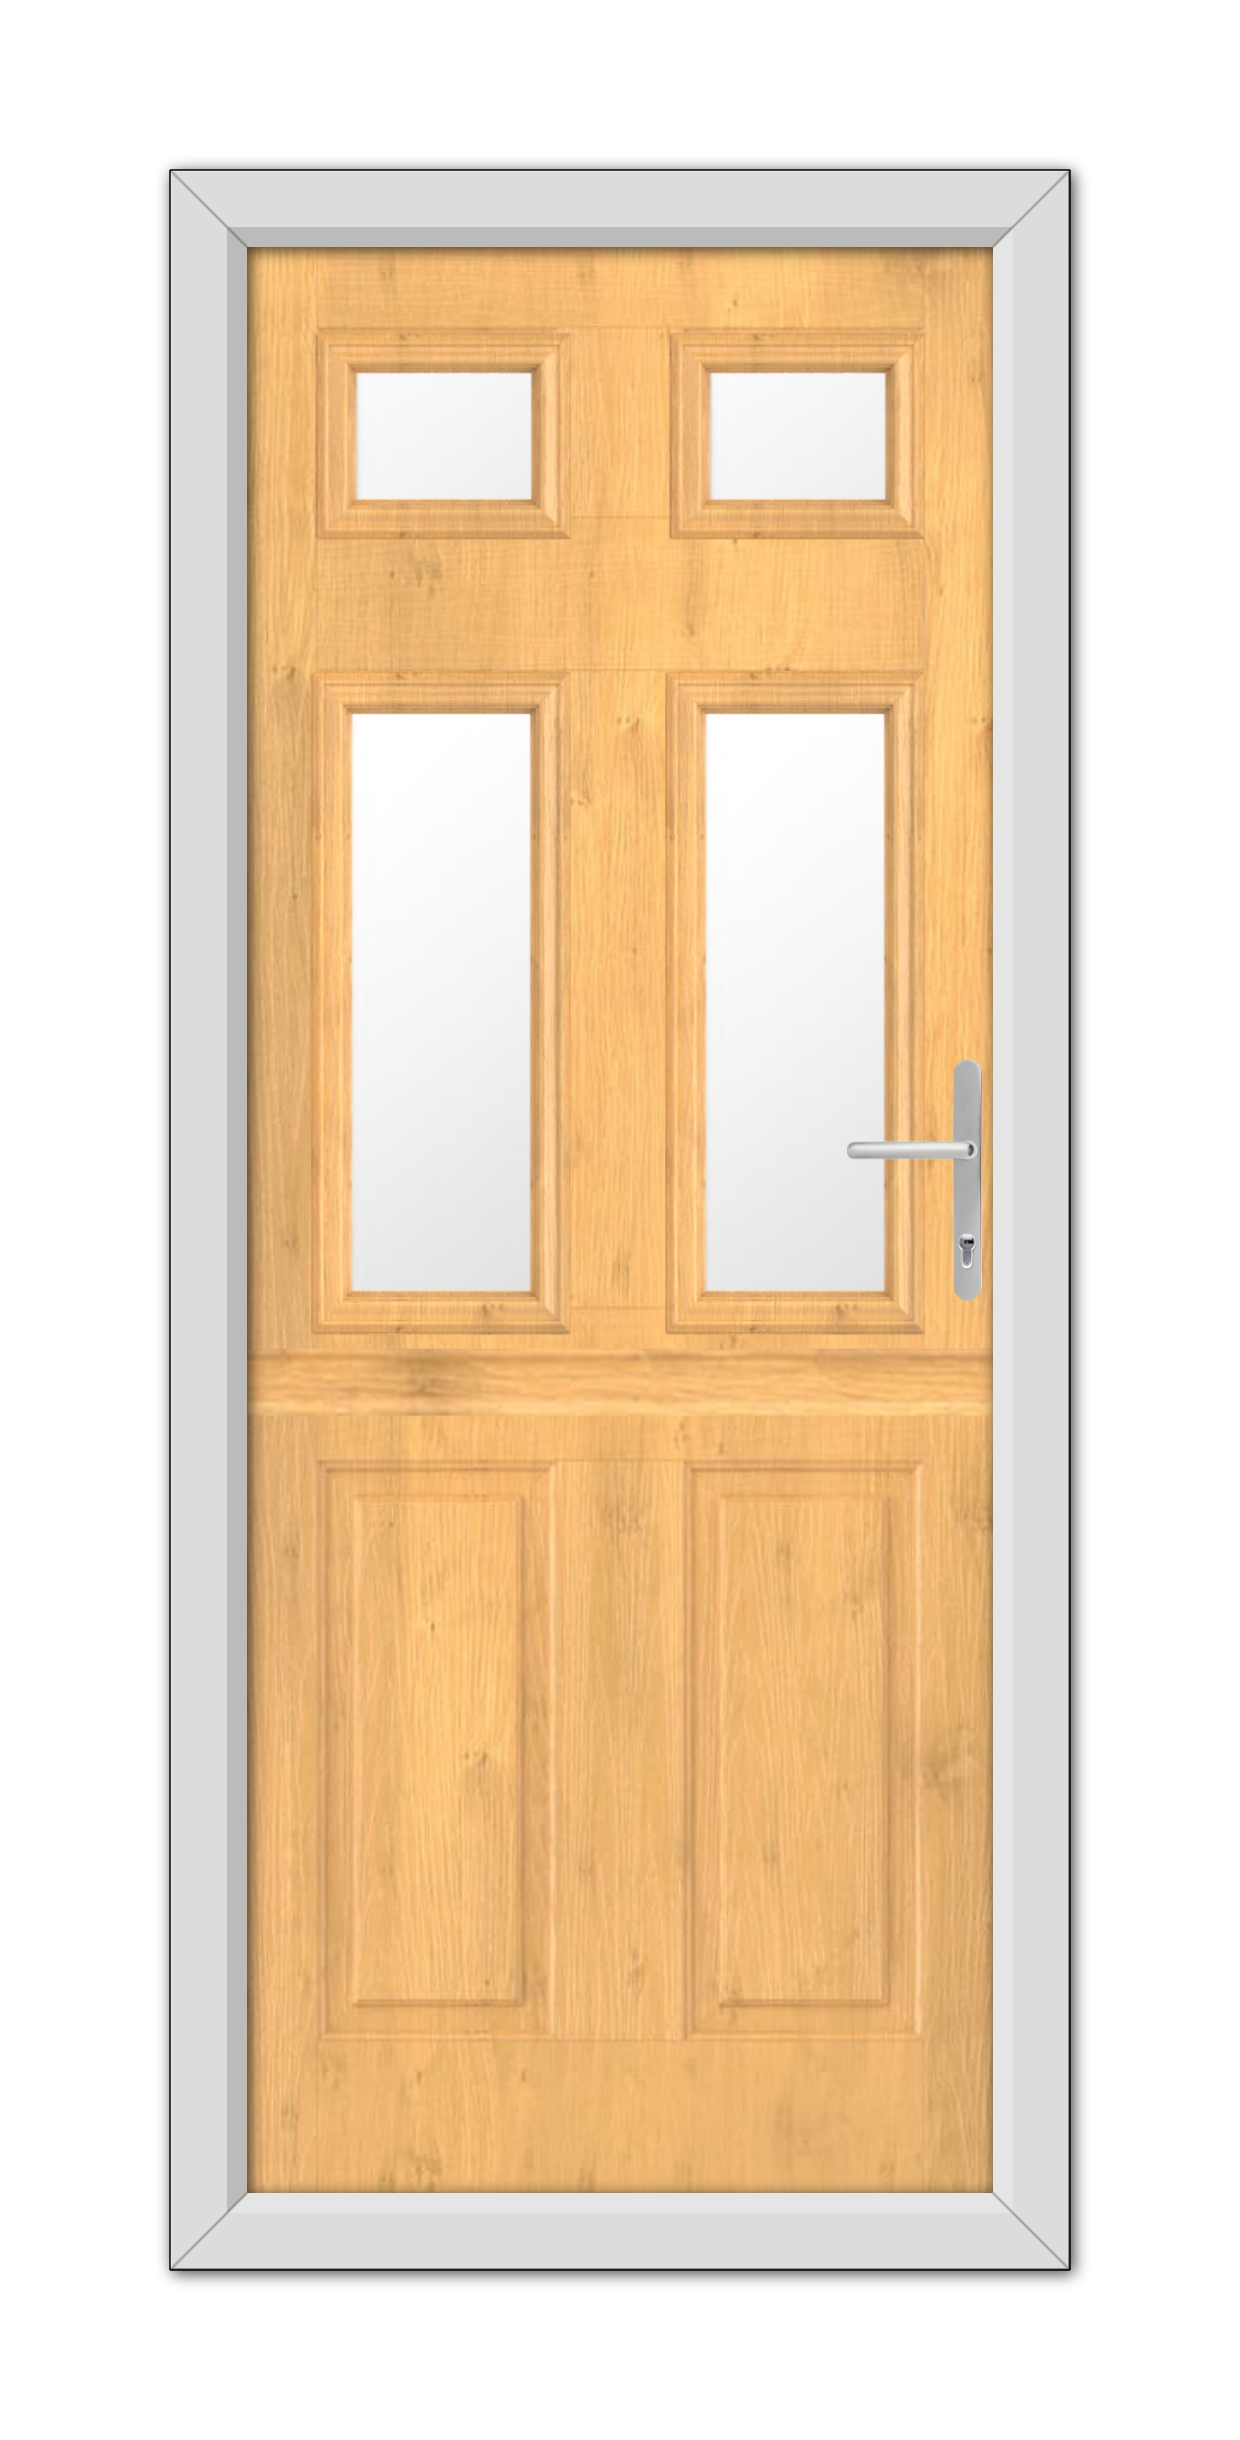 Irish Oak Middleton Glazed 4 Stable Composite Door 48mm Timber Core with glass panels and a silver handle, set within a grey frame.